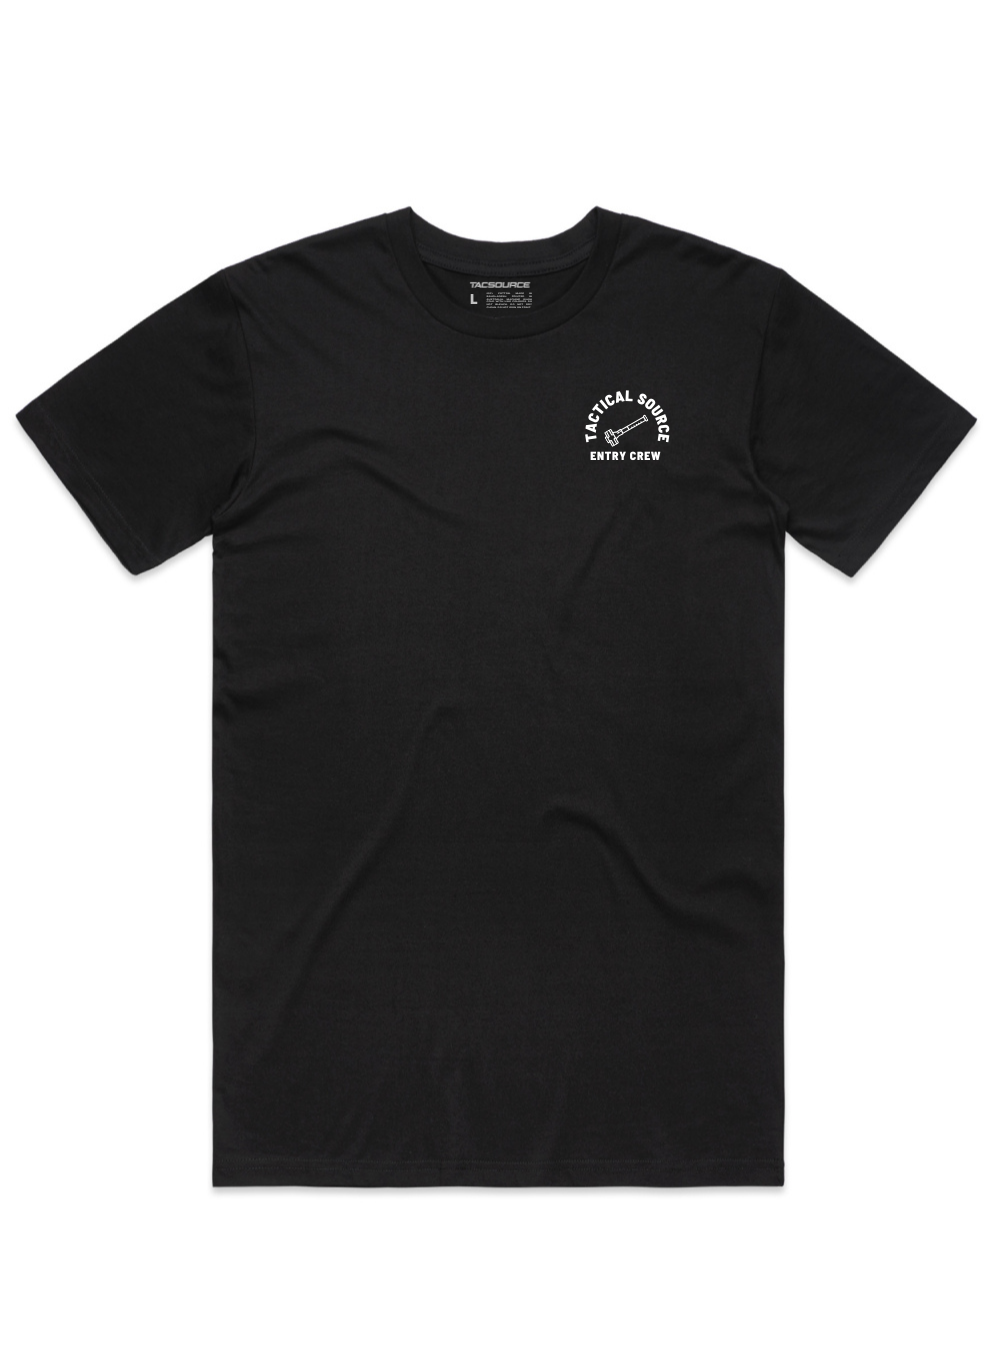 TacSource Entry Crew Hammer Tee